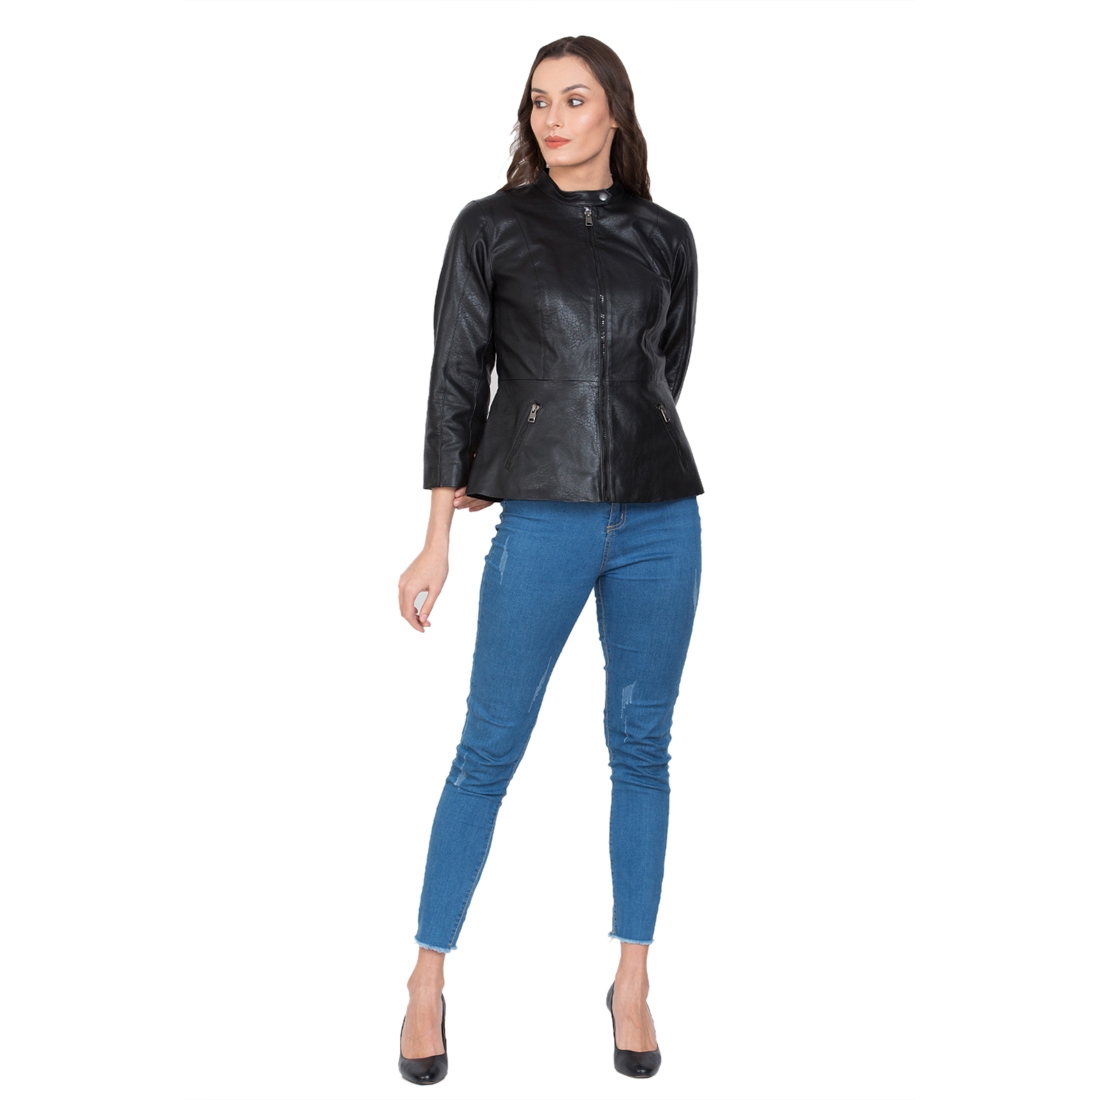 Justanned | JUSTANNED RAVEN WOMEN LEATHER JACKET 1